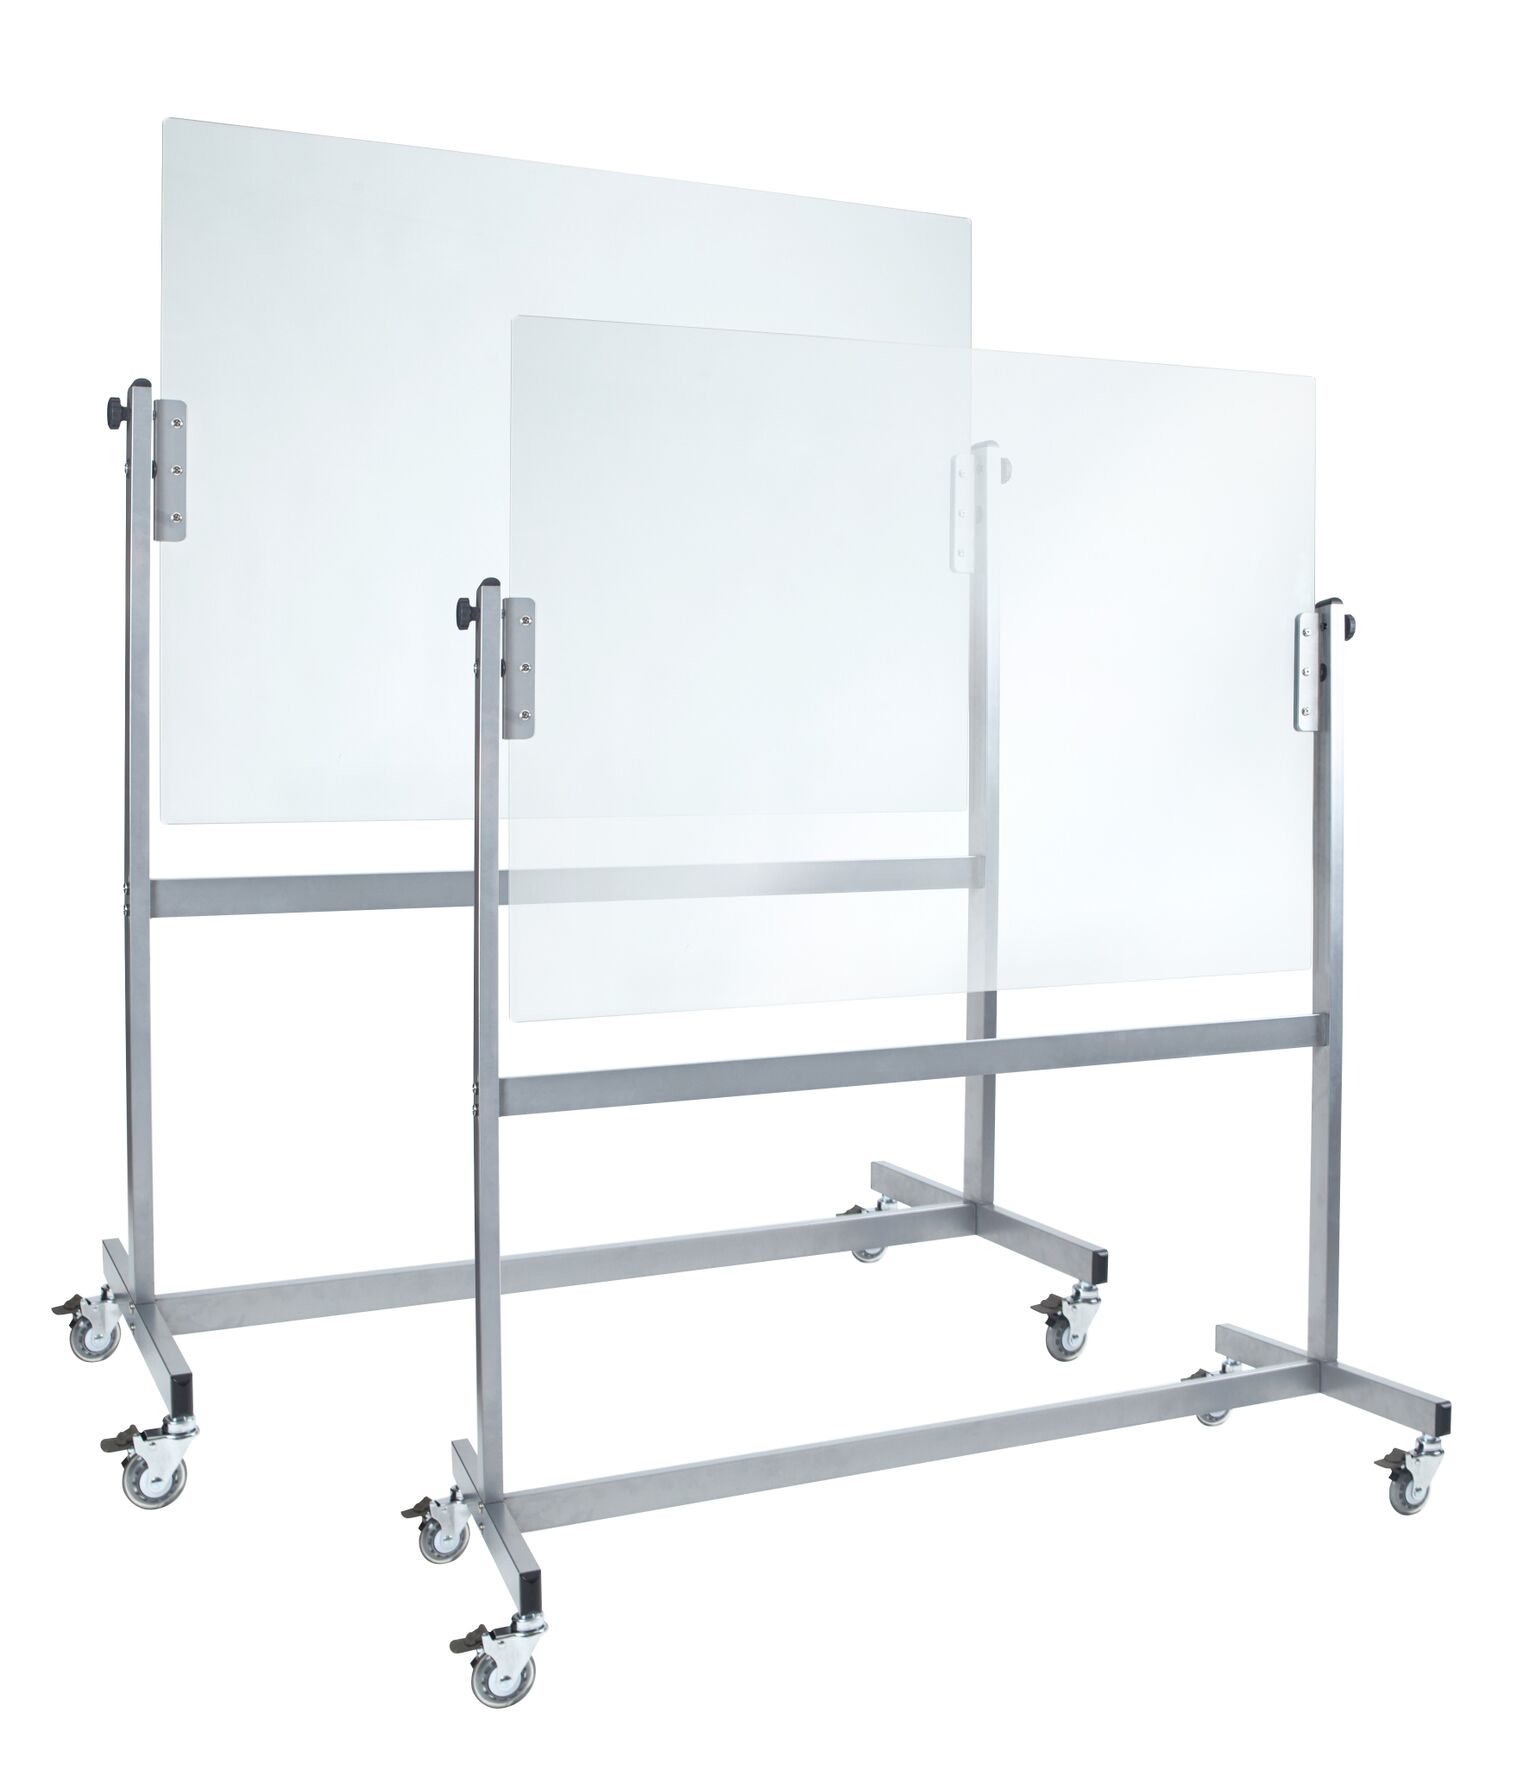 Two Double Sided Pivoting White Glassboards